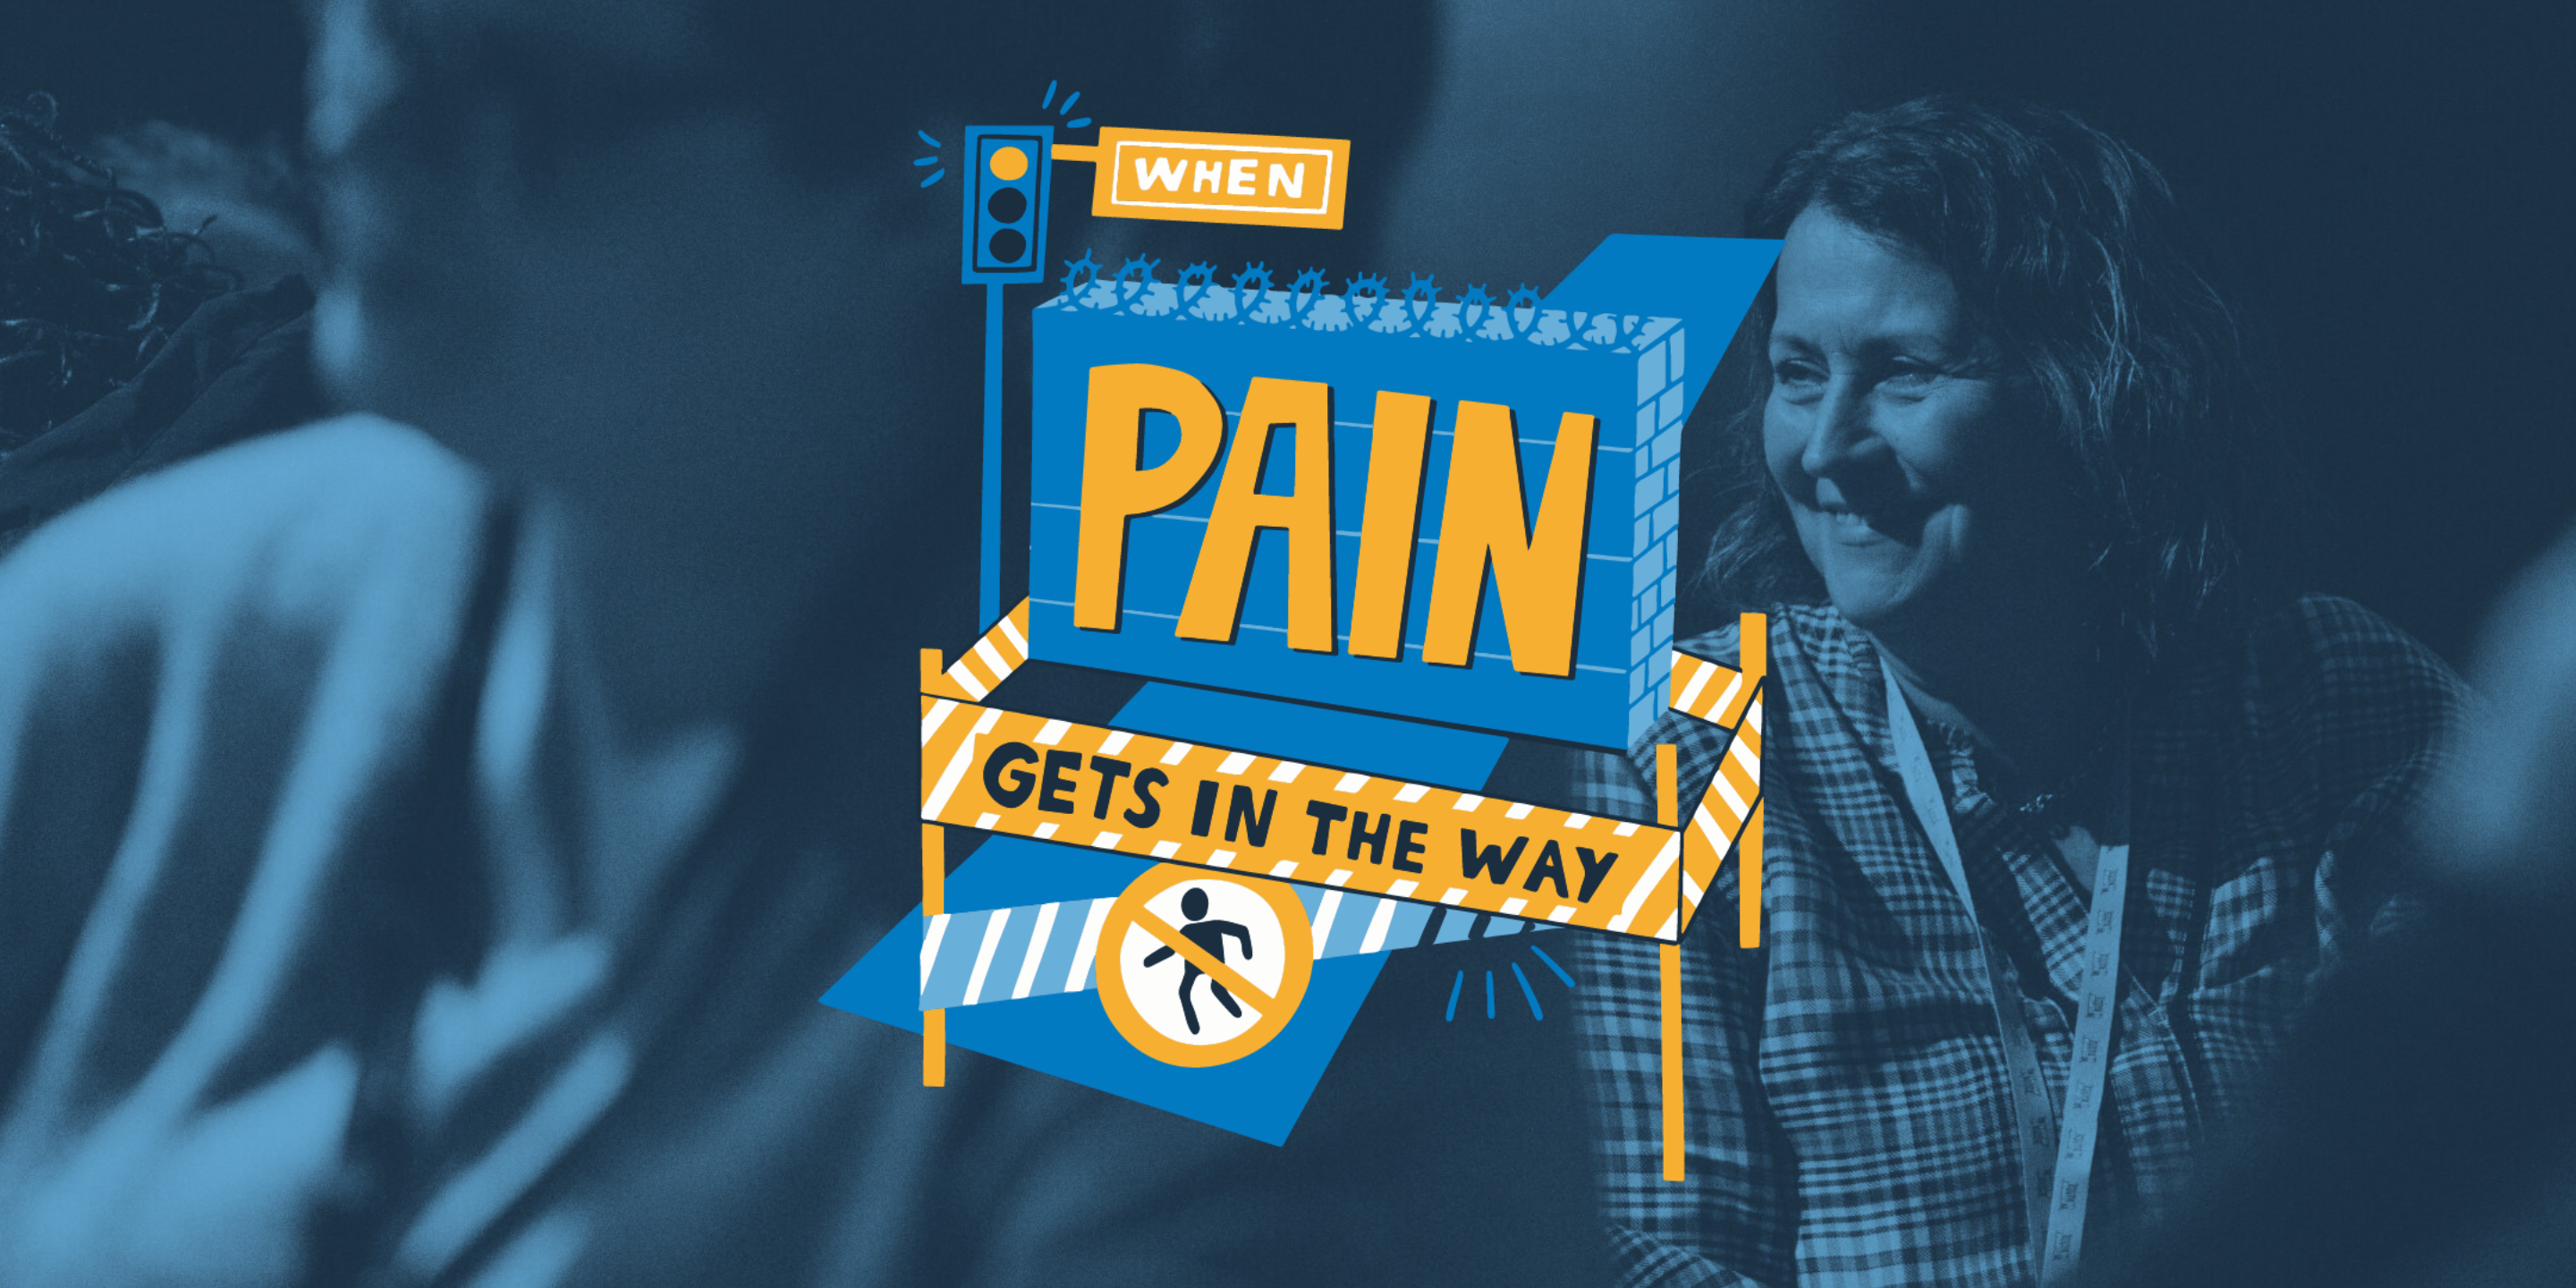 An image of a healthcare professional enjoying an event, alongside the logo for 'When Pain Gets in the Way'